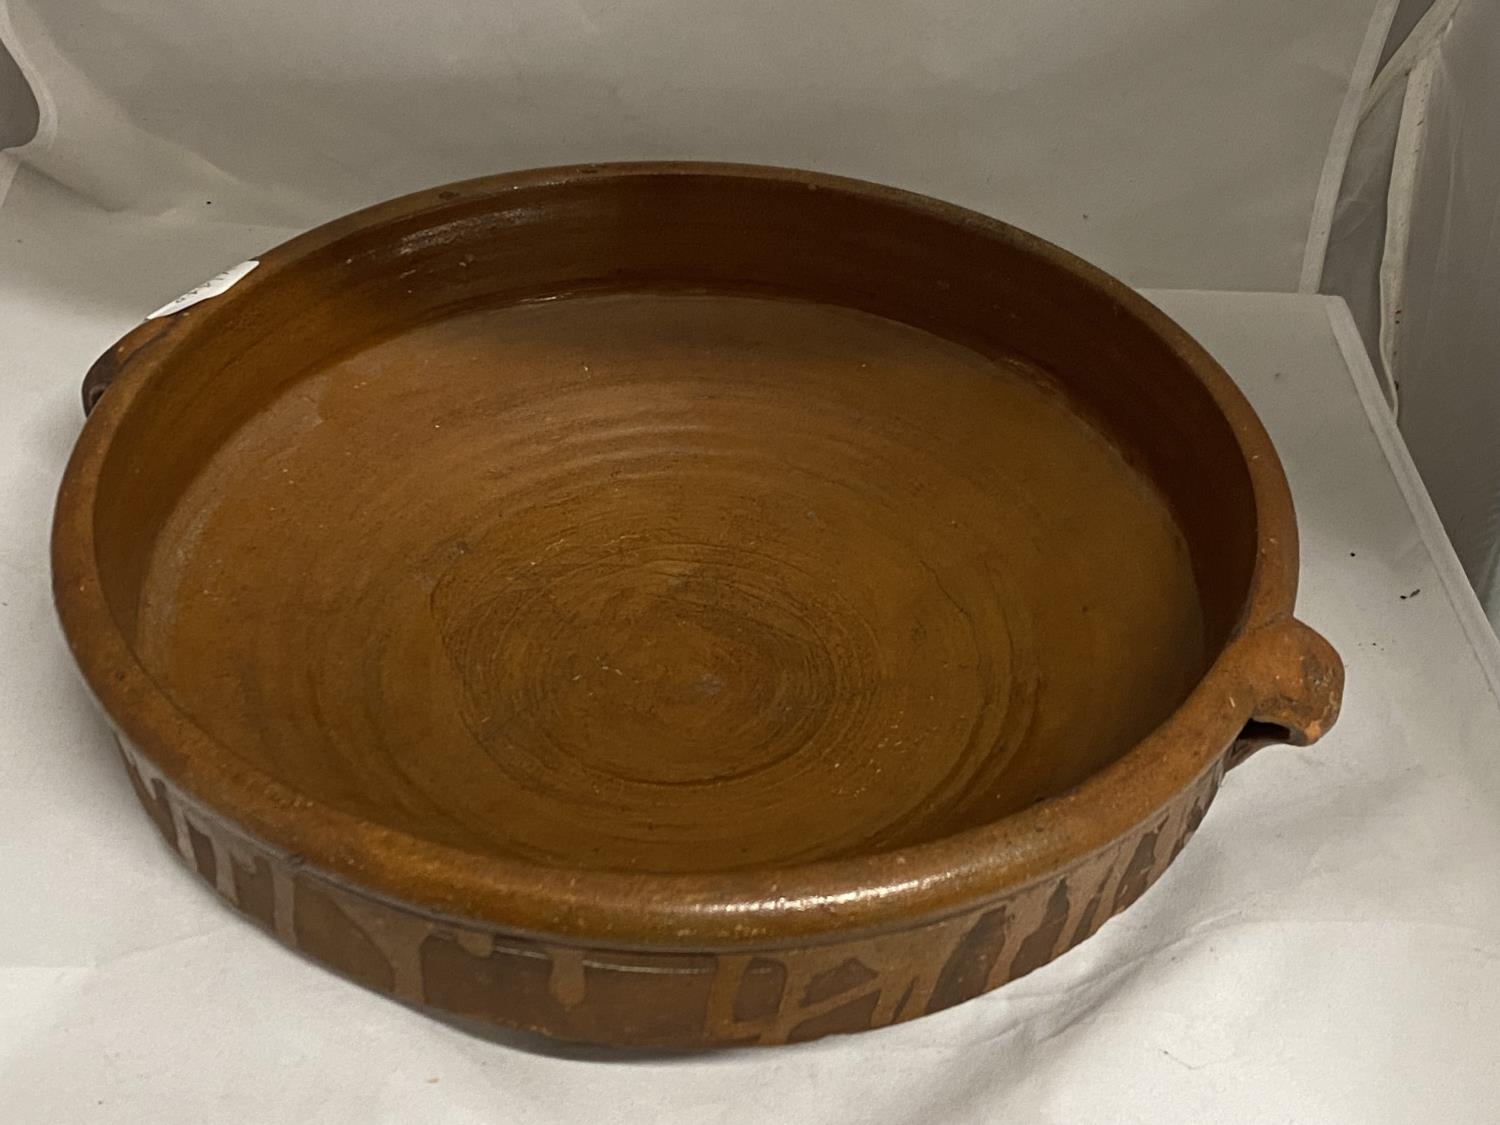 A Victorian terracotta and brown glazed cooking vessel d34cm, signed J POLLS shipping unavailable